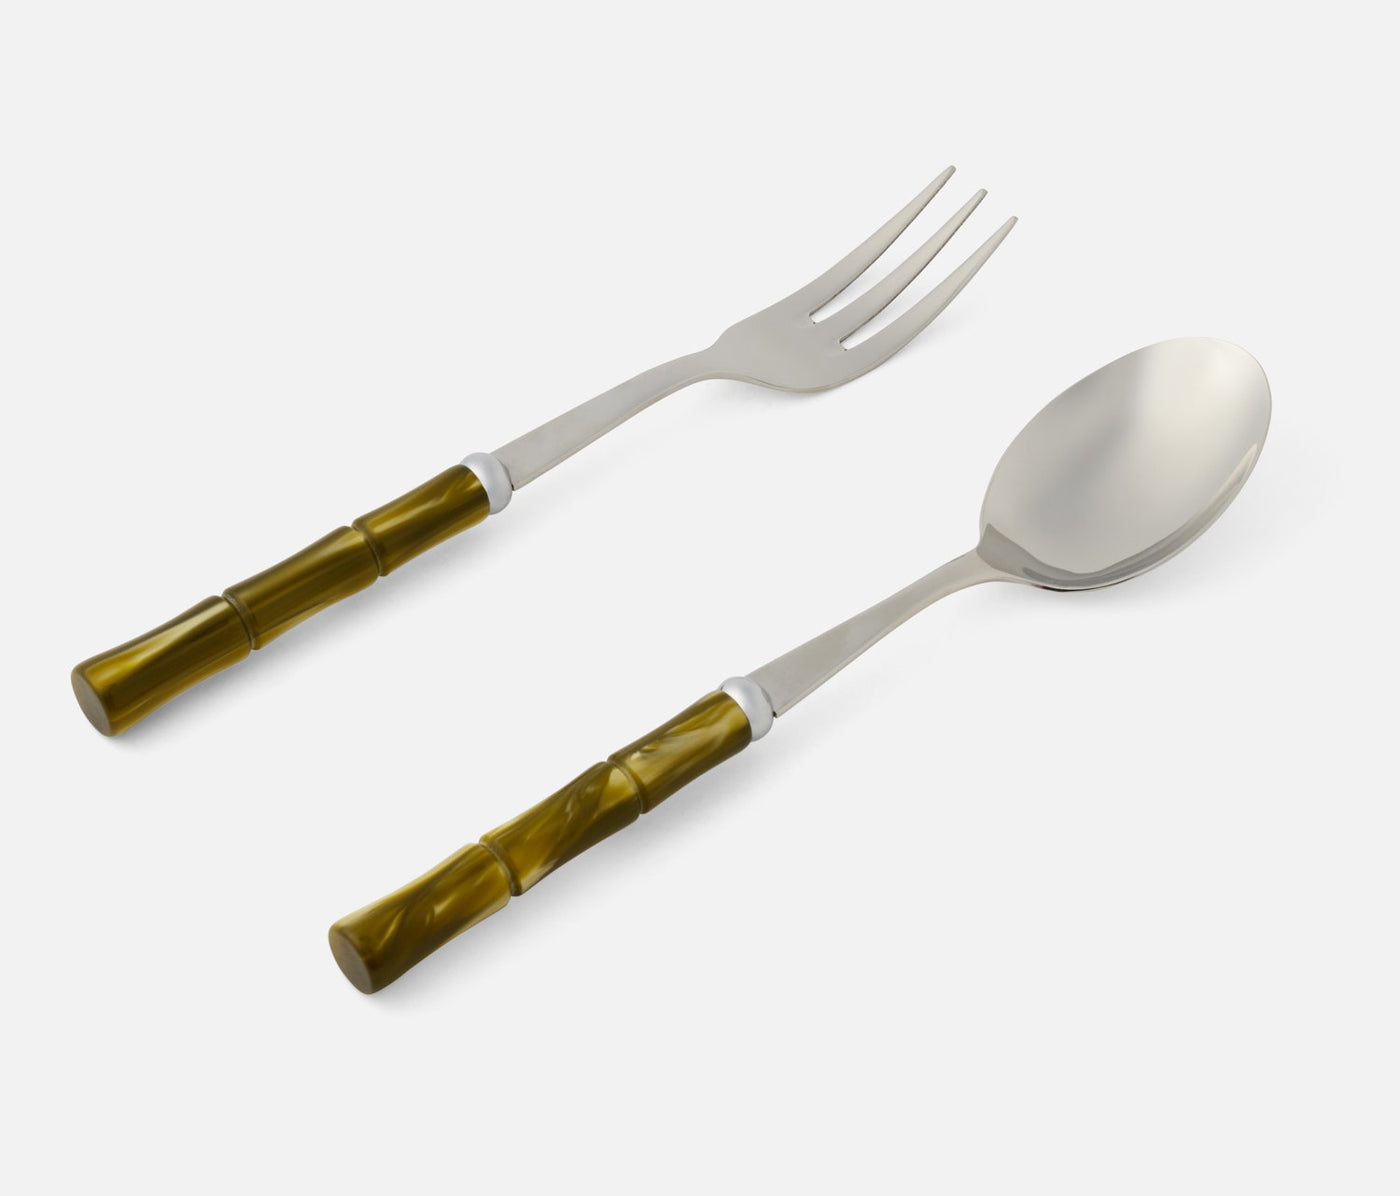 Lucy Bamboo Serving Set